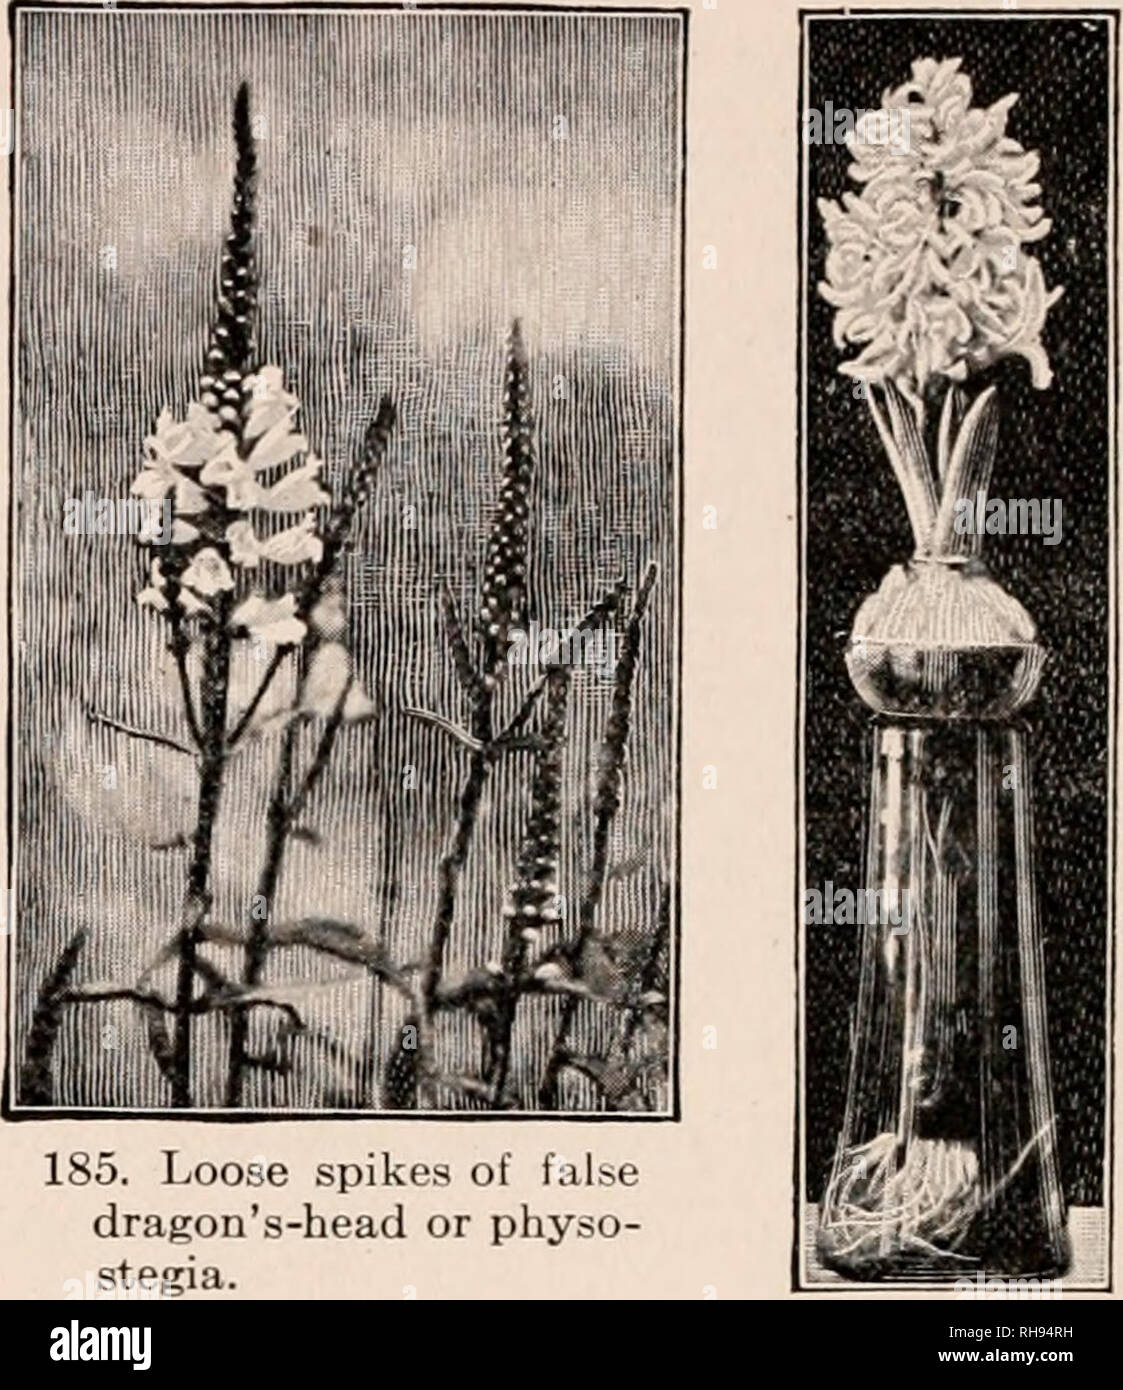 . Botany for secondary schools; a guide to the knowledge of the vegetation of the neighborhood. Plants. 120 FLOWER-BRANCHES may be lateral to it, as in Fig. 184. Racemes often bear the flowers on one side of the stem, or in a single row. 250. When a corym- bose flower-cluster is long and dense and the flowers are sessile or nearly so, it is called a spike (Figs. 185, 186). Common examples of spikes are plantain, mignonette, mullein. 251. A very short and dense spike is a head, 187) are examples. 186. Spike of hyaci n th. Note, also, that the flowers and foliage are produced from the stored foo Stock Photo